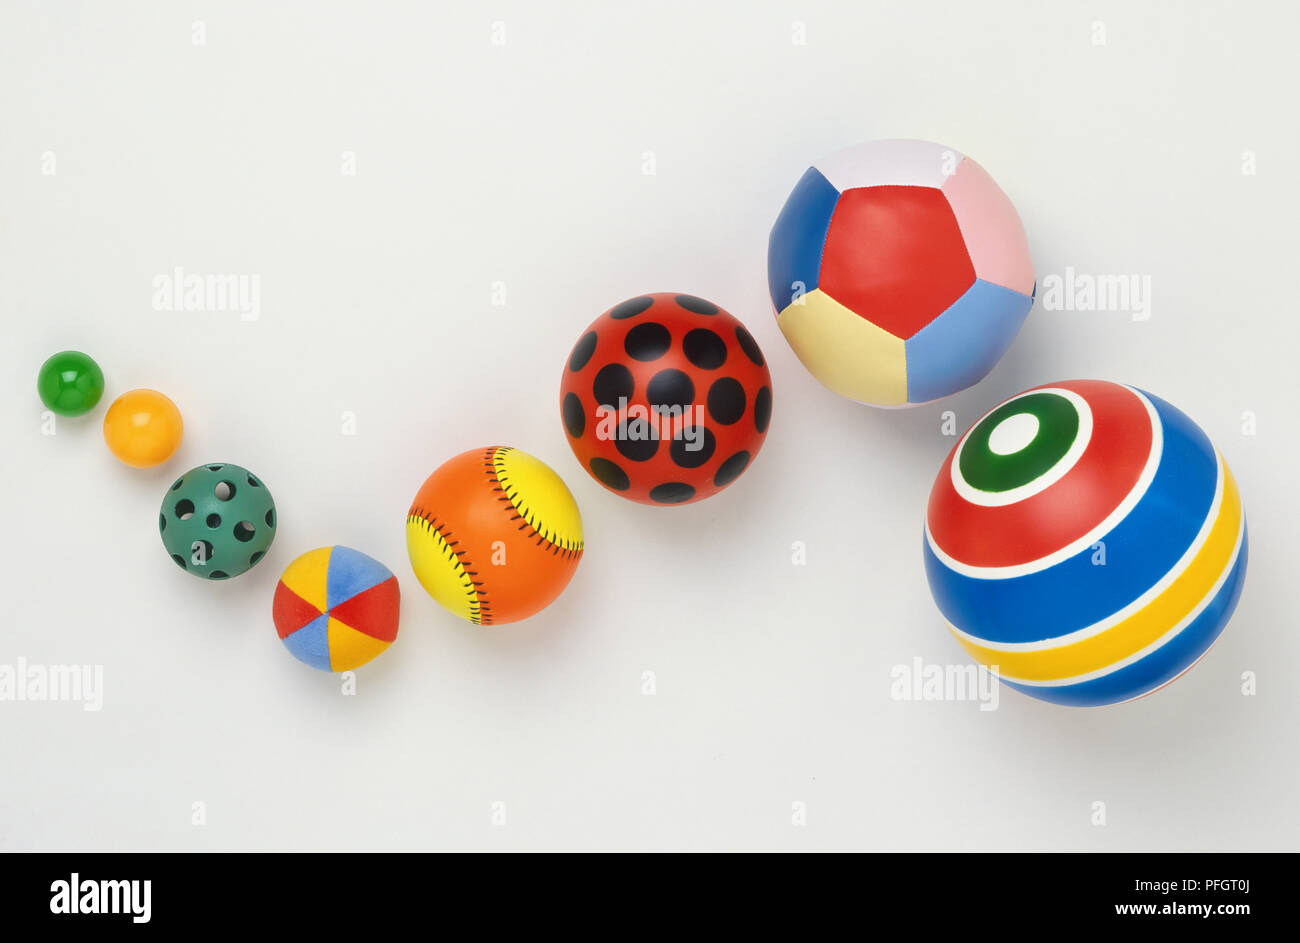 Eight colourful balls of different patterns and sizes, arranged in snake-like shape. Stock Photo